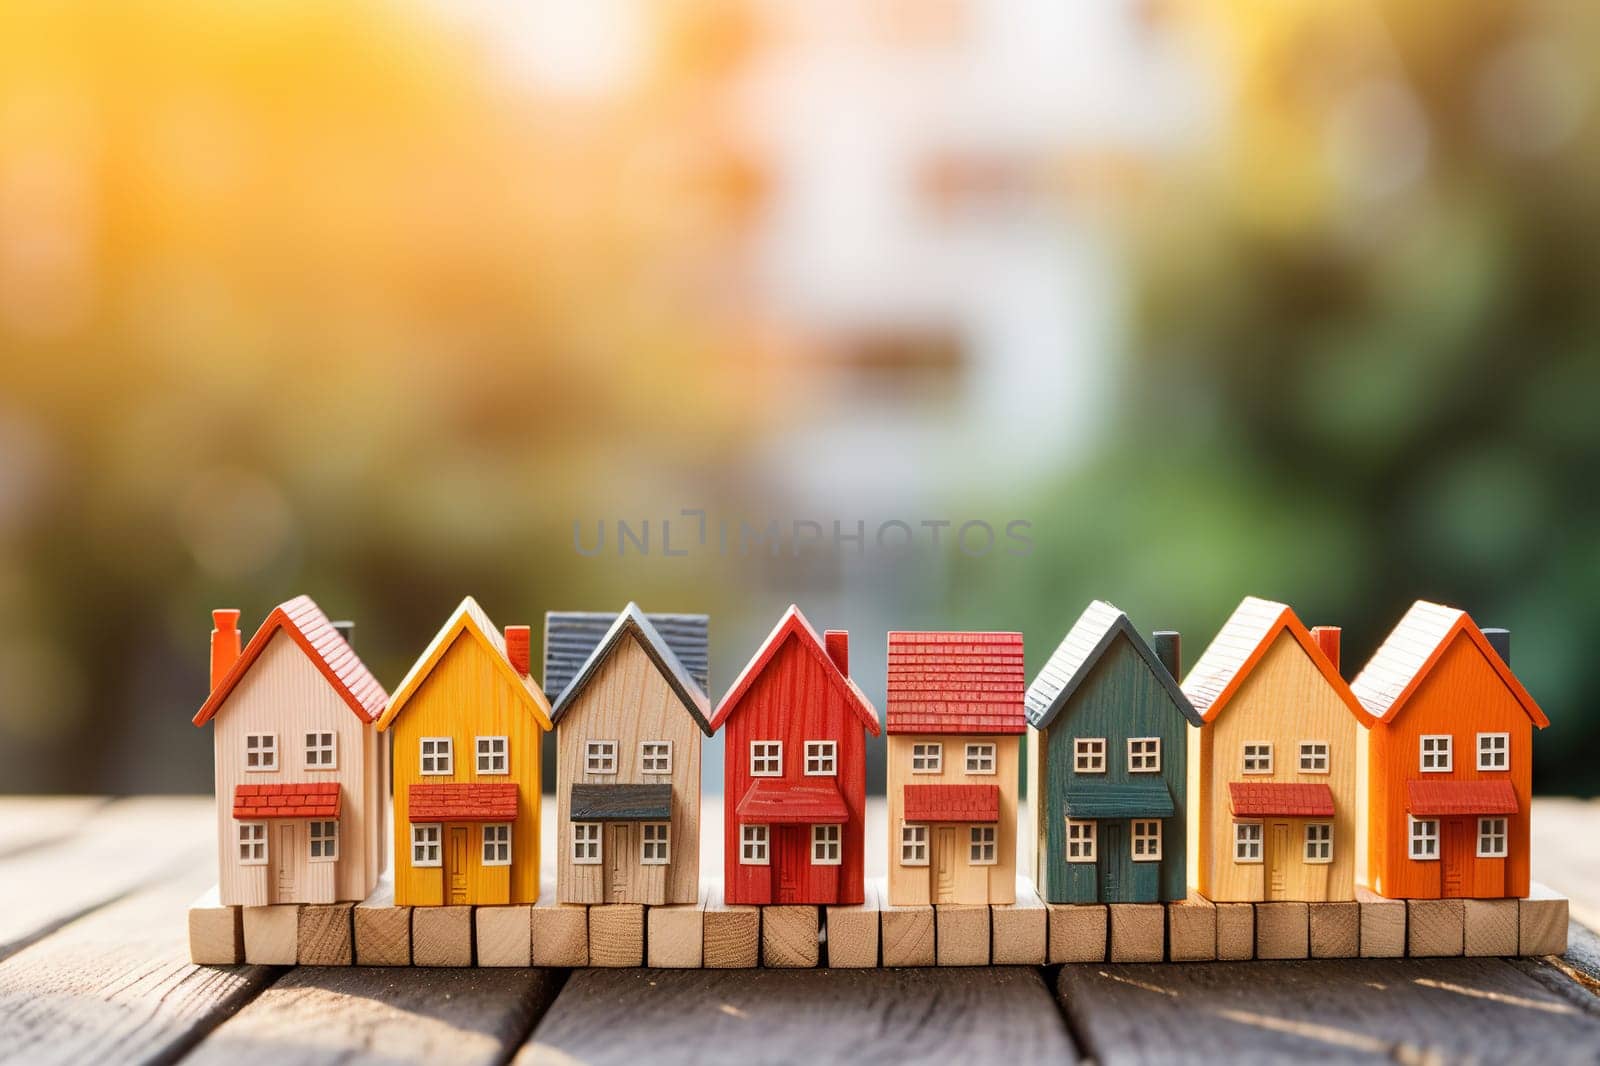 Small wooden house models on a wooden surface with bokeh phonemes. The concept of searching, buying a home.